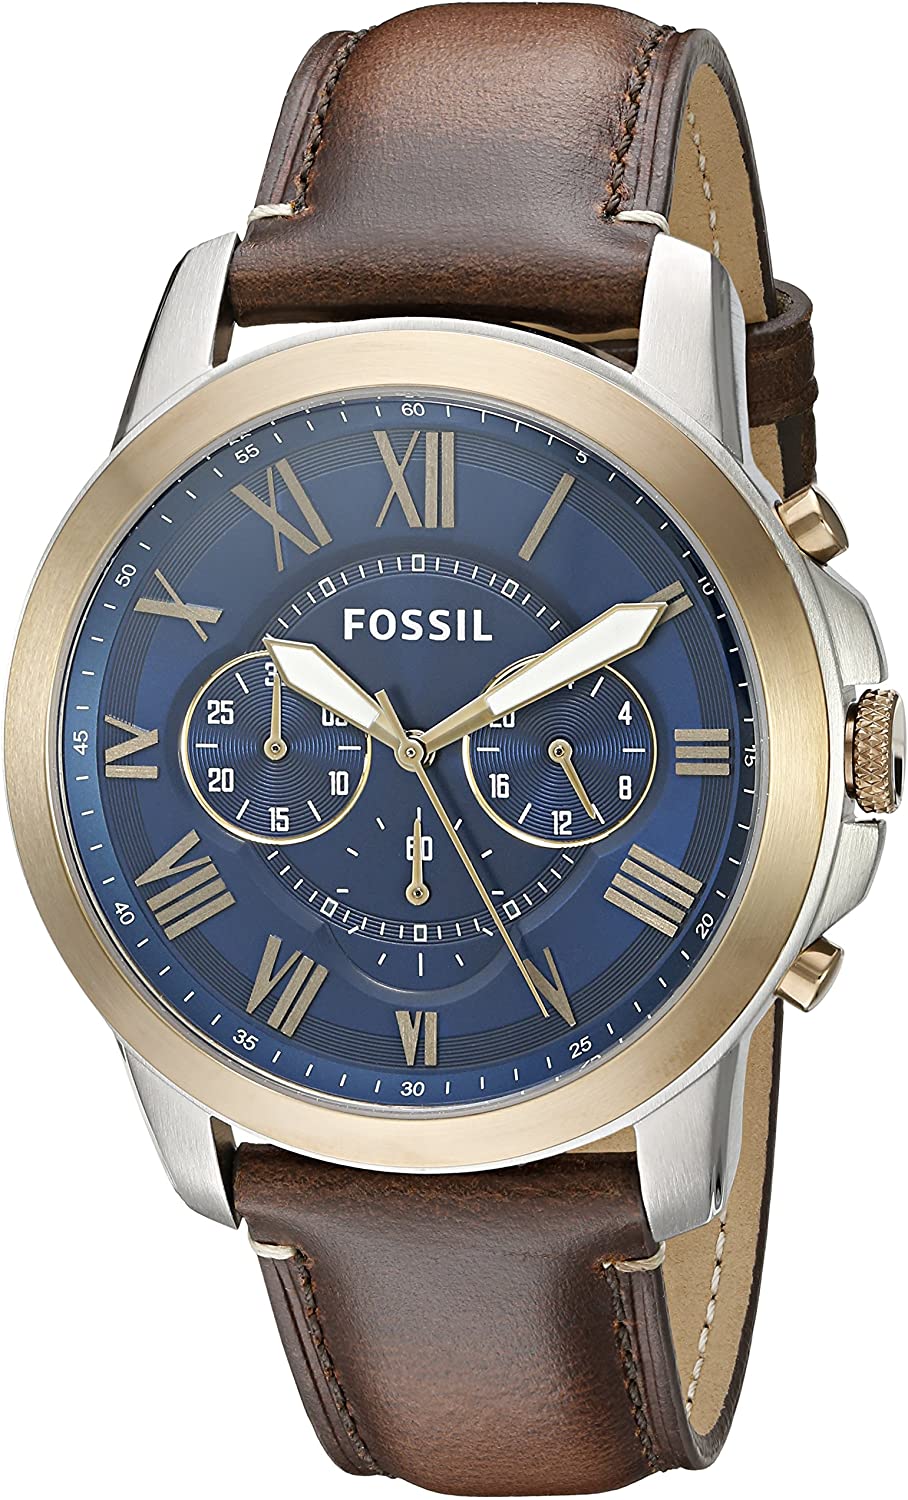 Fossil Men s FS5150 Grant Chronograph Dark Brown Leather Watch